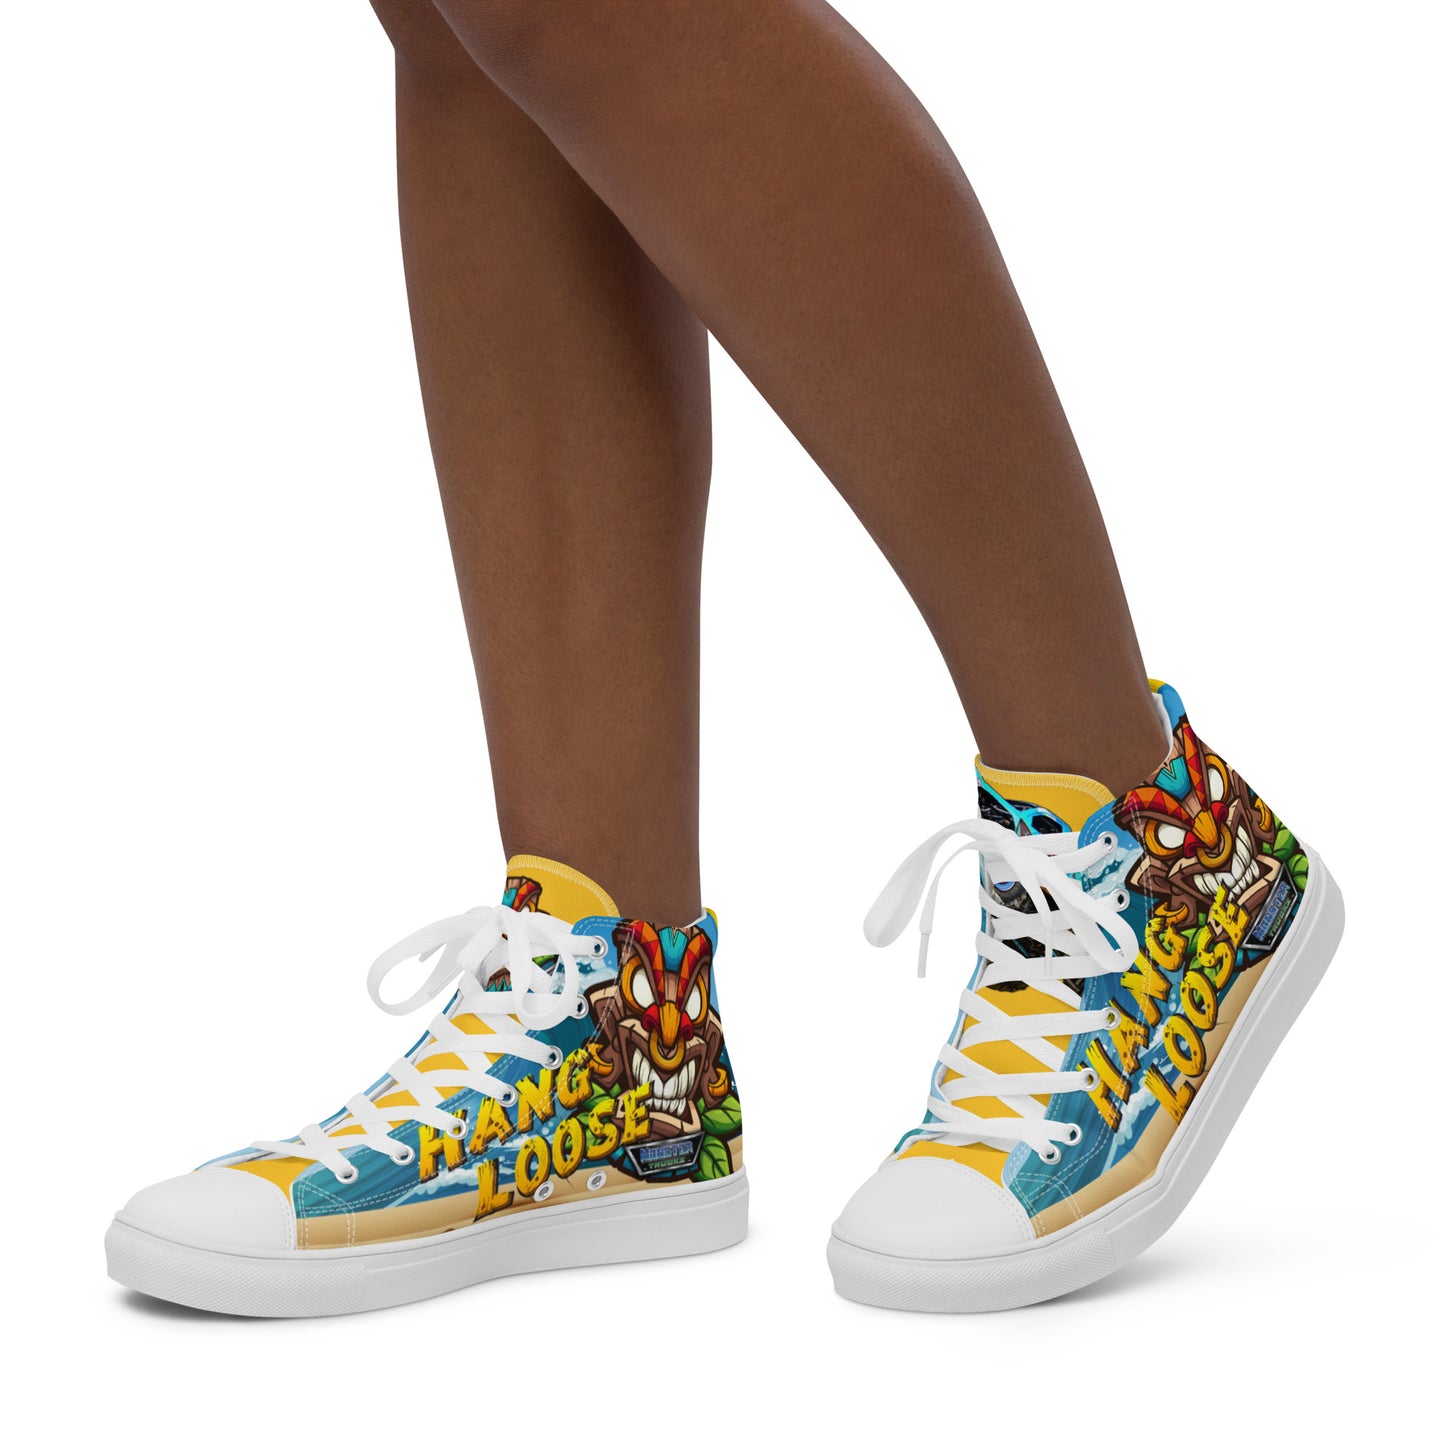 Hang Loose Women’s high top canvas shoes